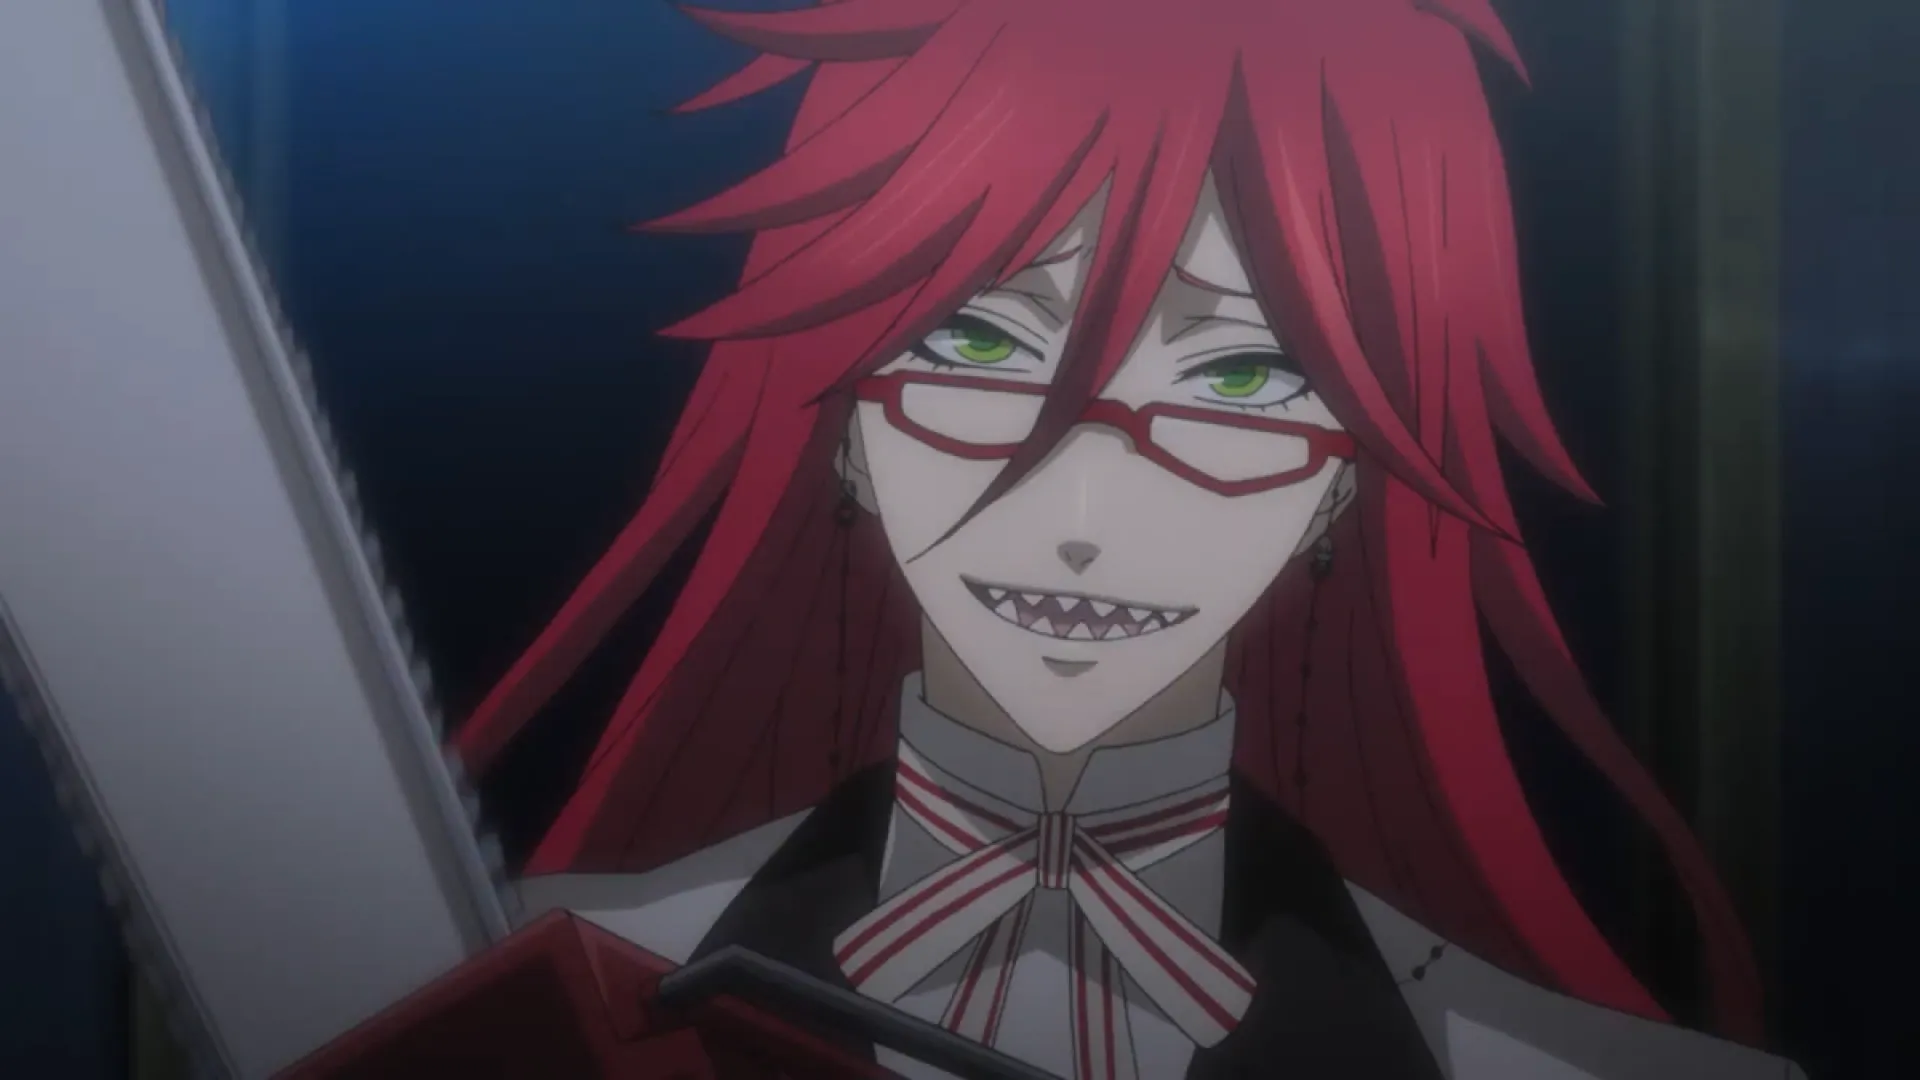 Grell giving a shark tooth smile while holding a chainsaw